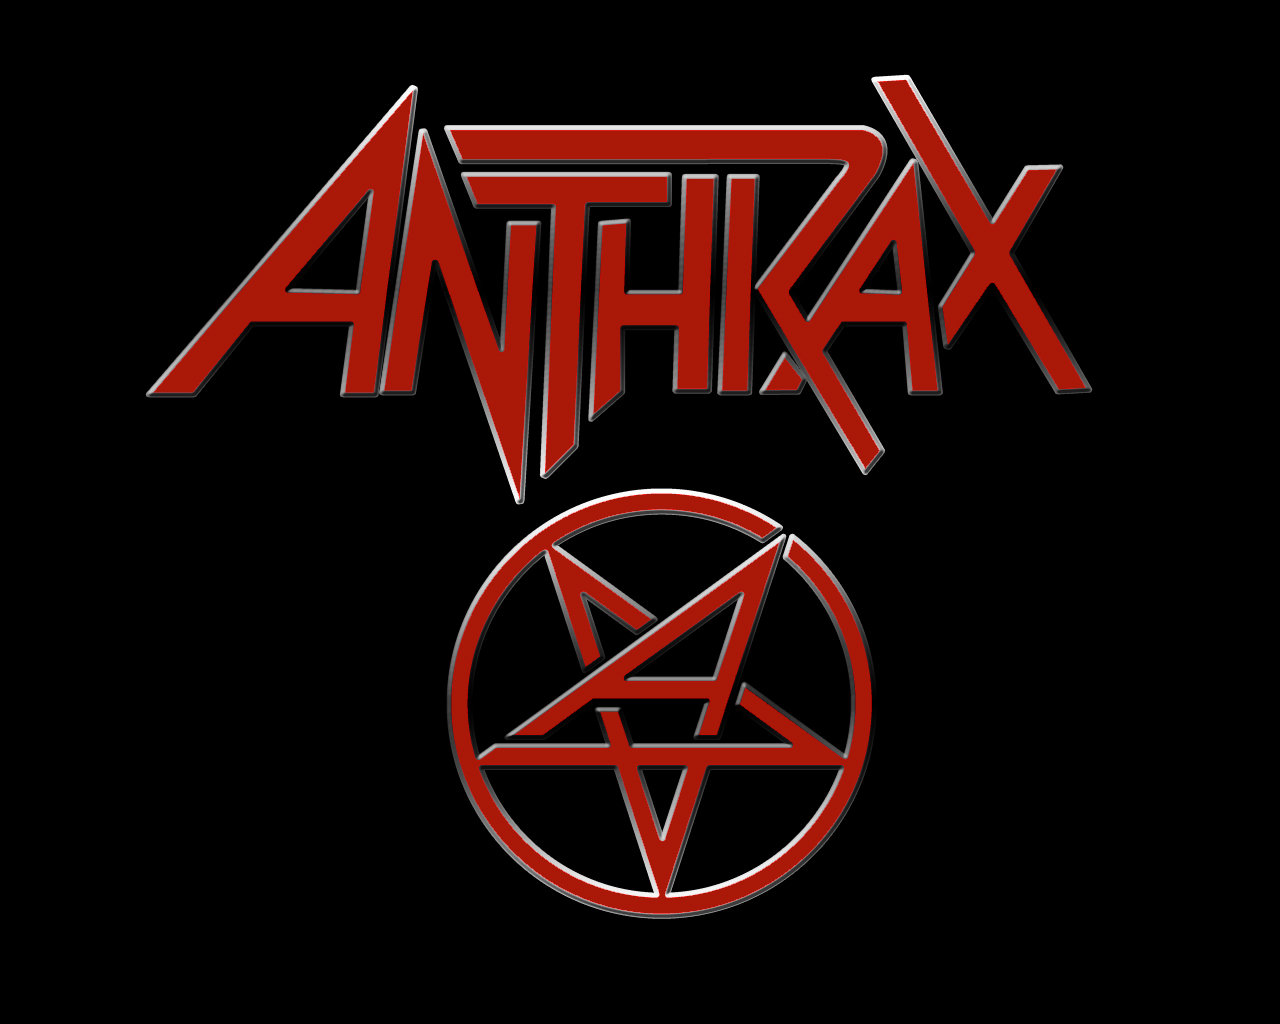 Anthrax Pics, Music Collection